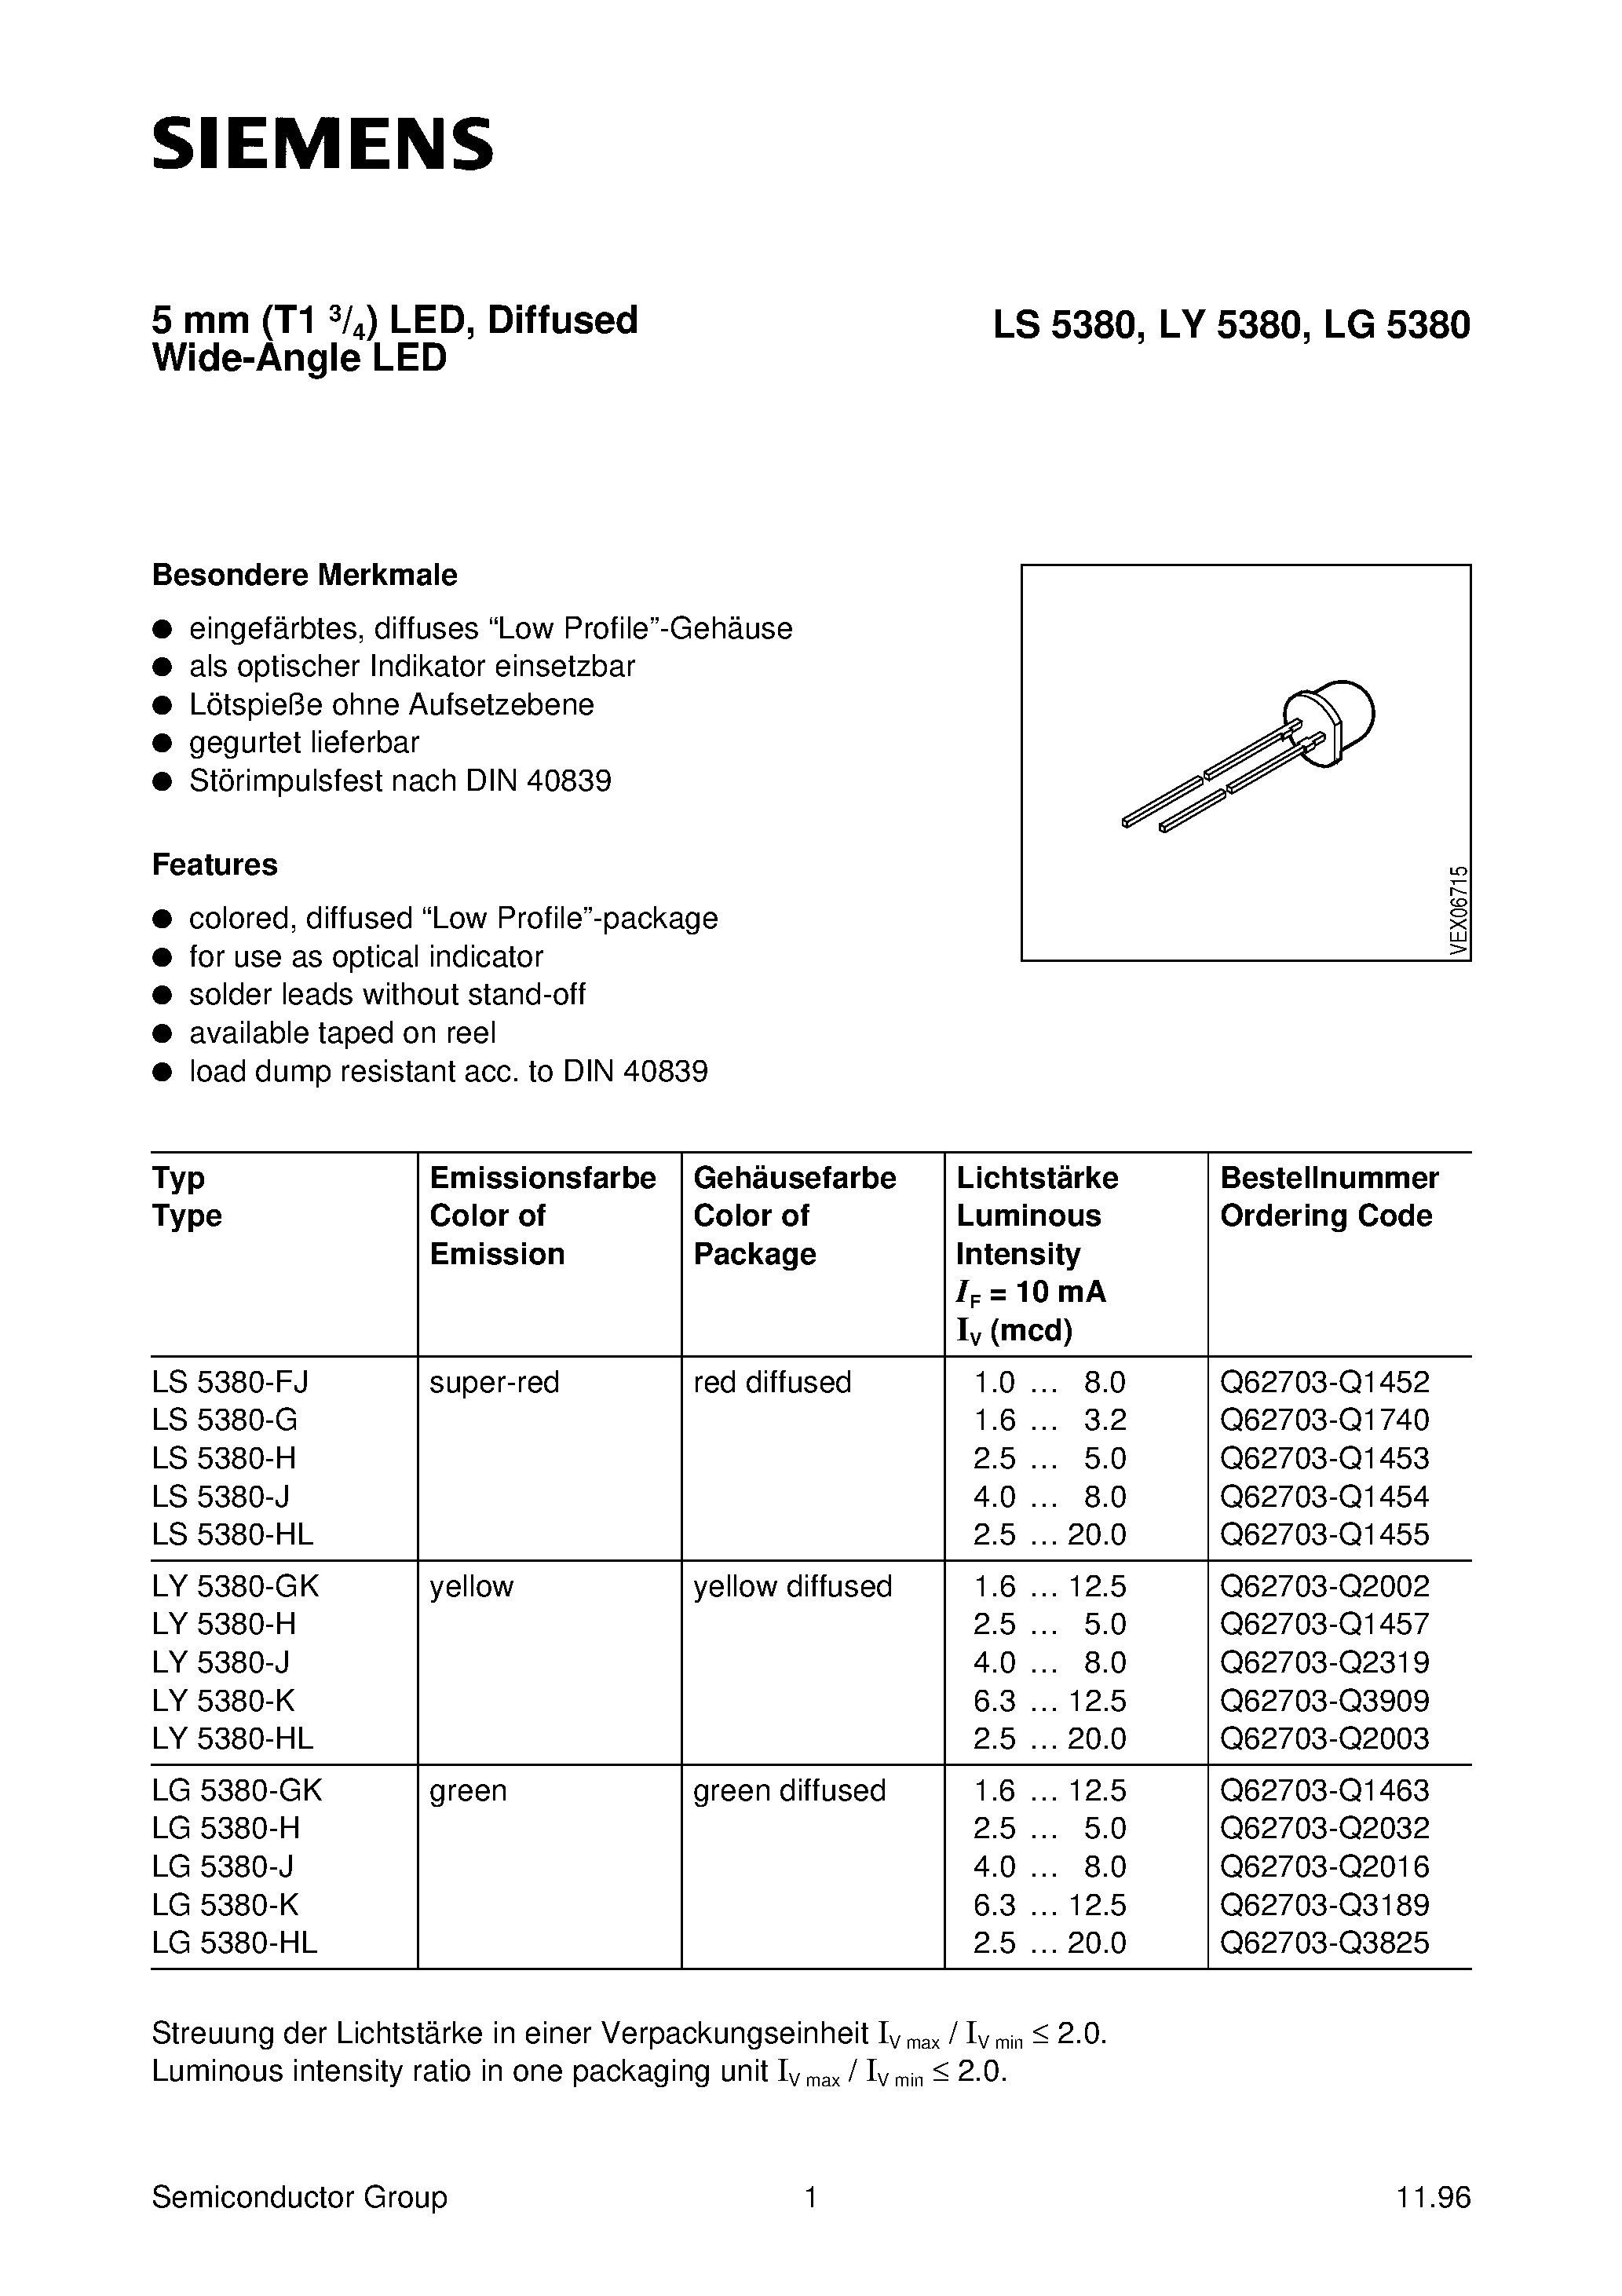 Datasheet LY5380-K - 5 mm T1 3/4 LED/ Diffused Wide-Angle LED page 1